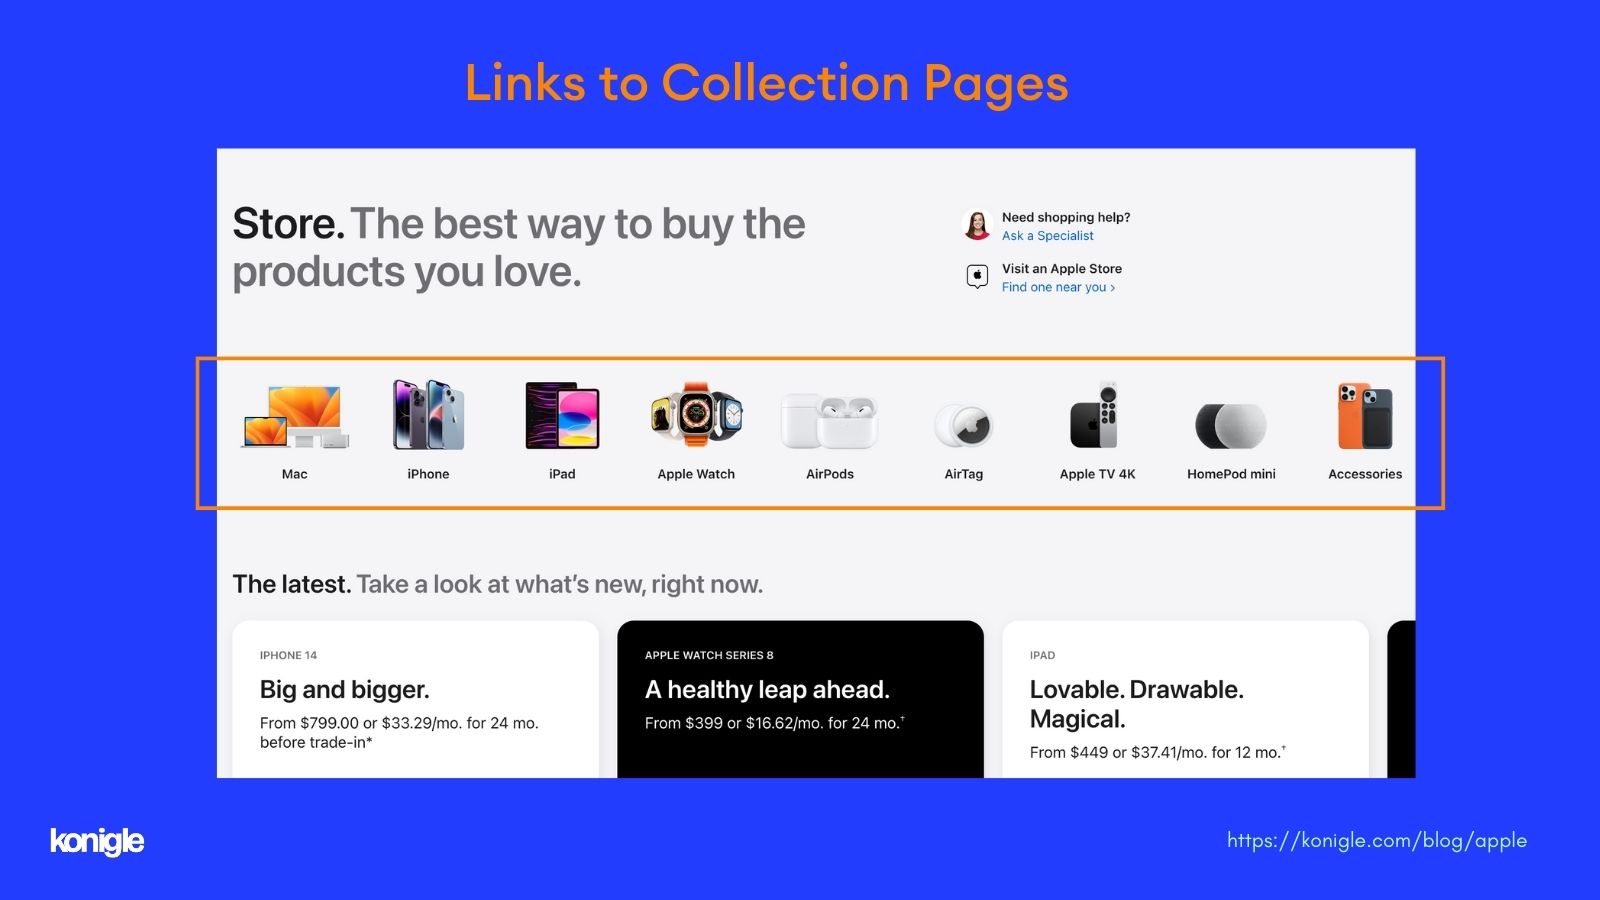 The Apple Store displays links to collection pages prominently across the store